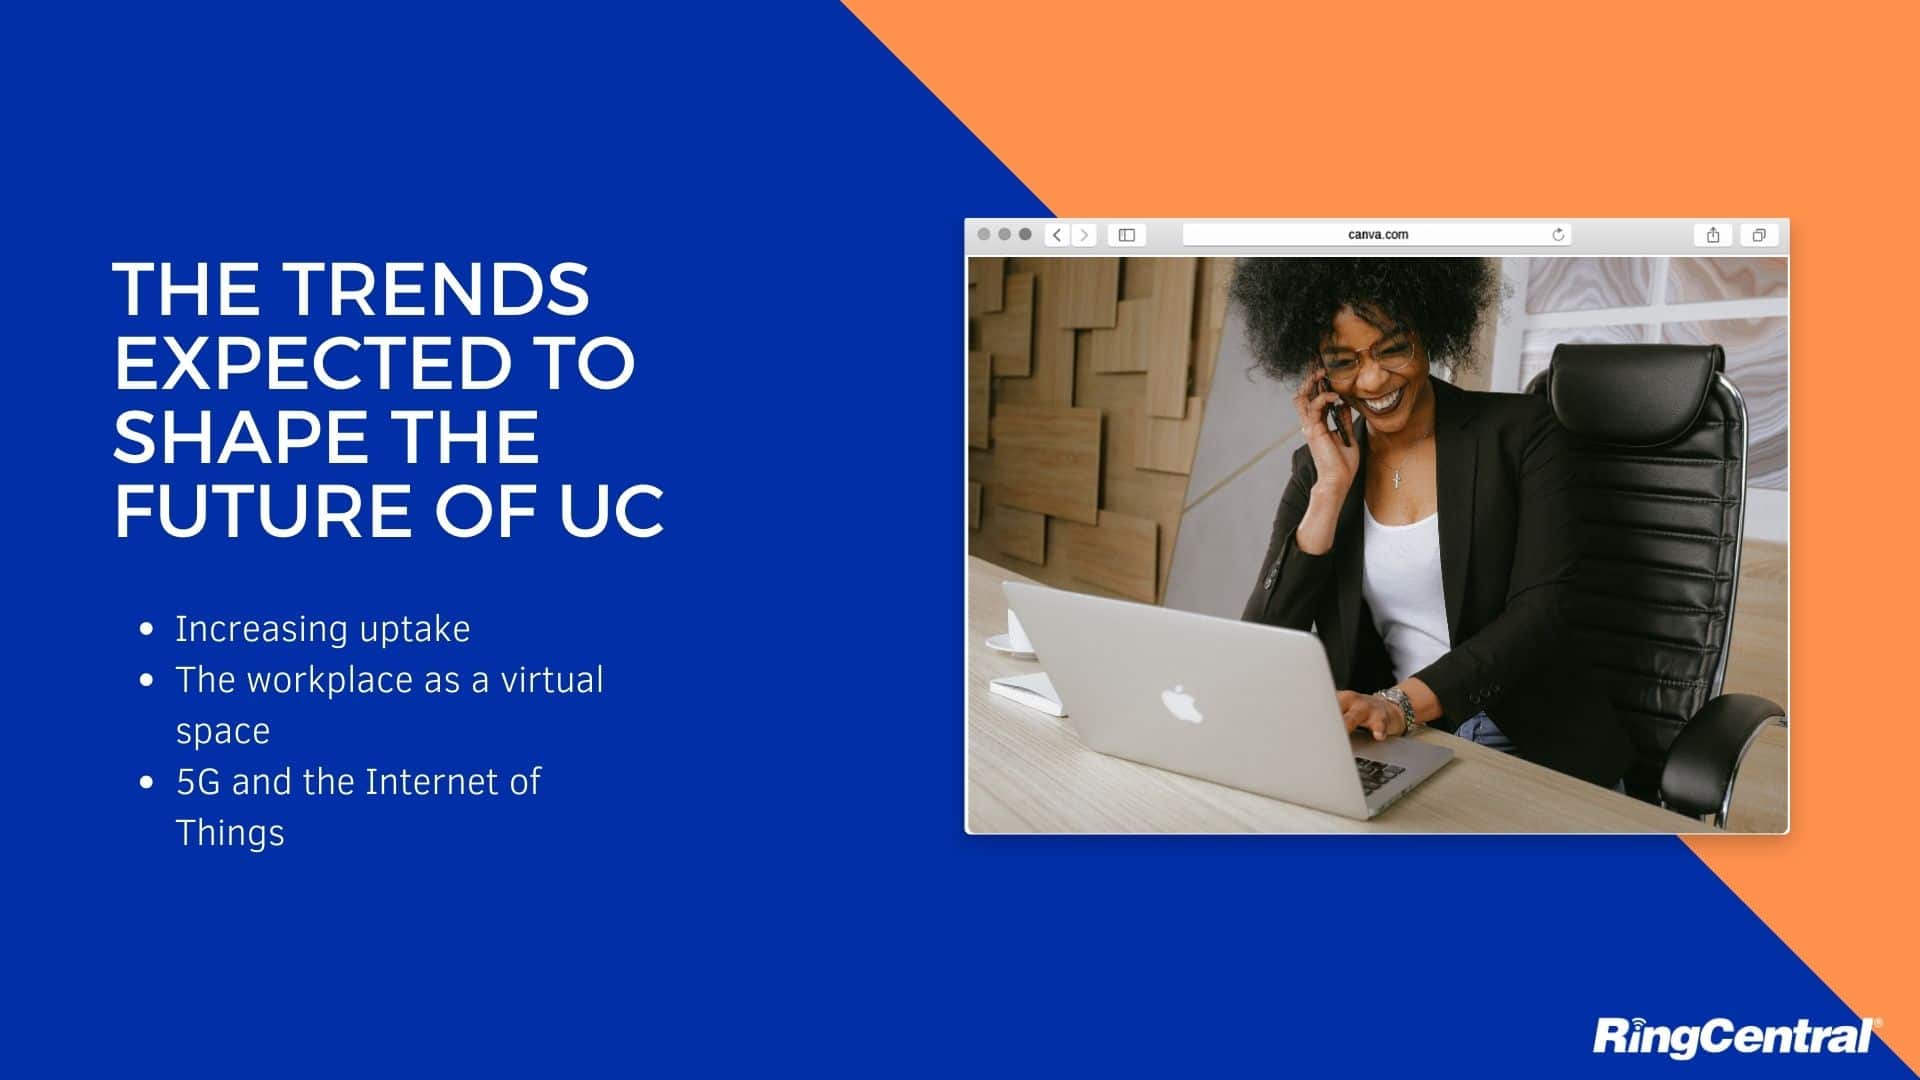 The trends expected to shape the future of UC